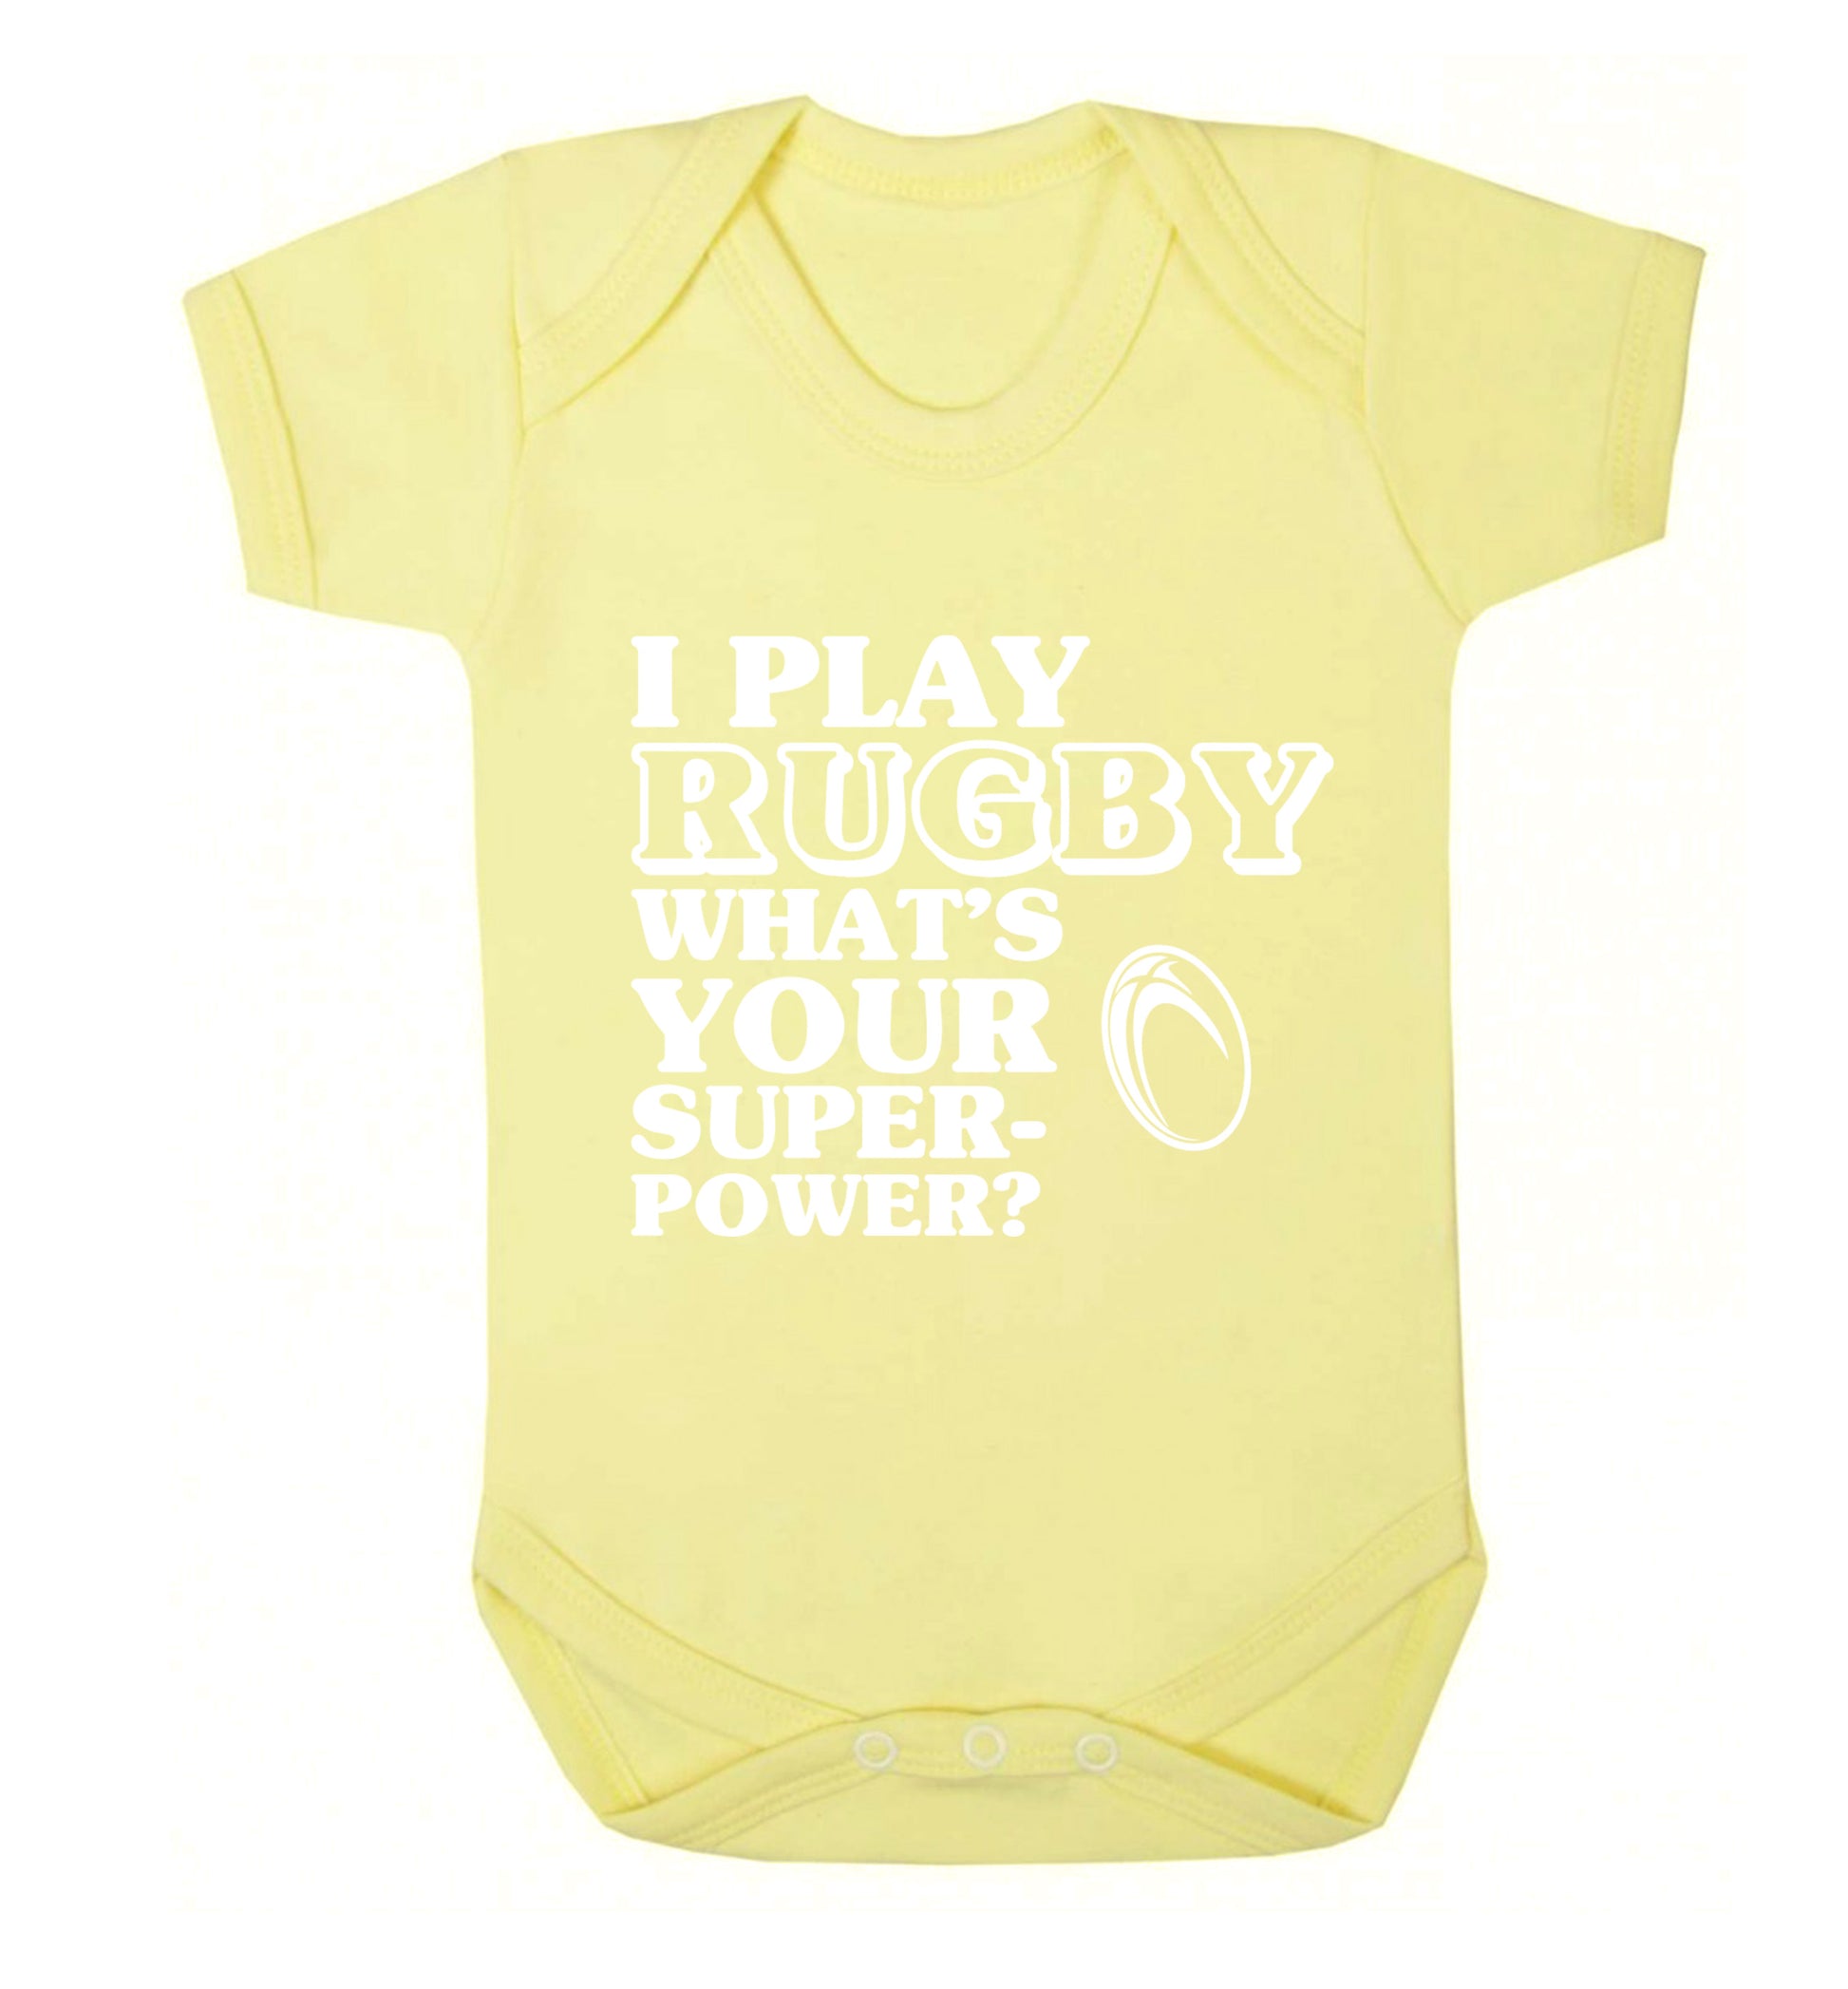 I play rugby what's your superpower? Baby Vest pale yellow 18-24 months